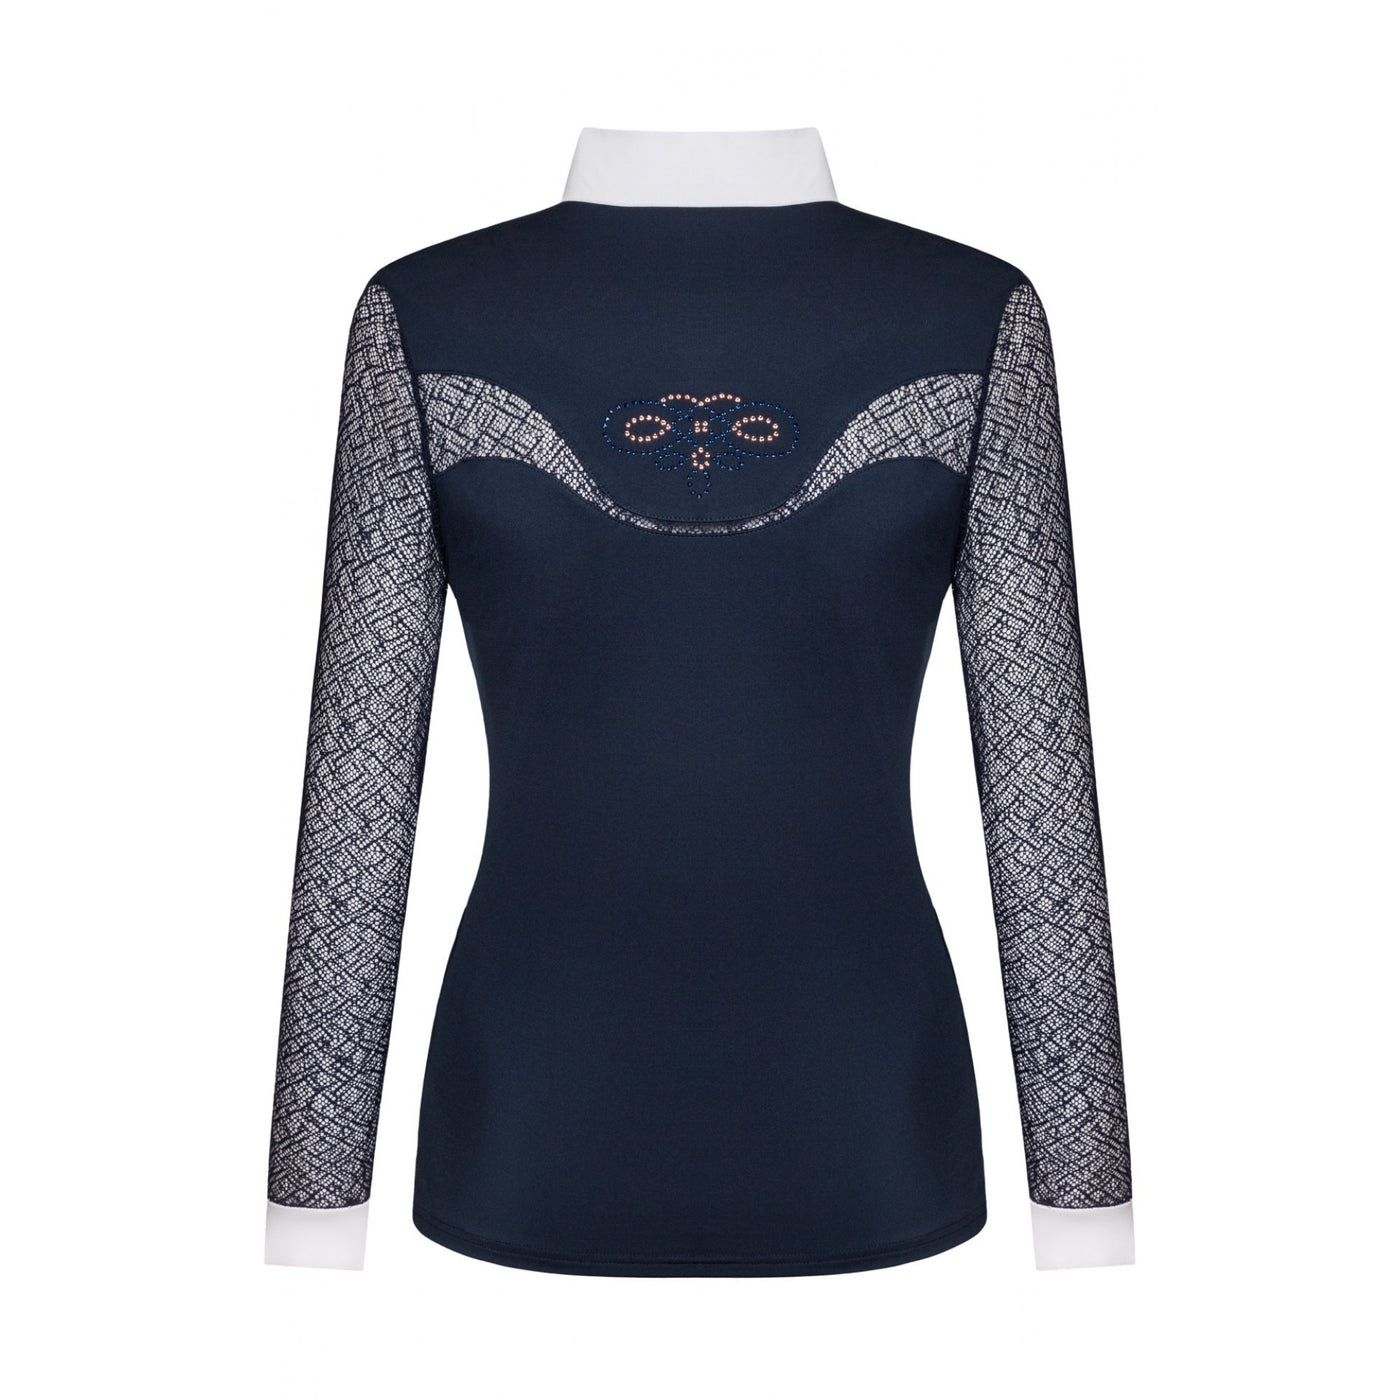 FAIR PLAY CECILE ROSEGOLD LONG SLEEVE COMPETITION SHOW SHIRT - NAVY